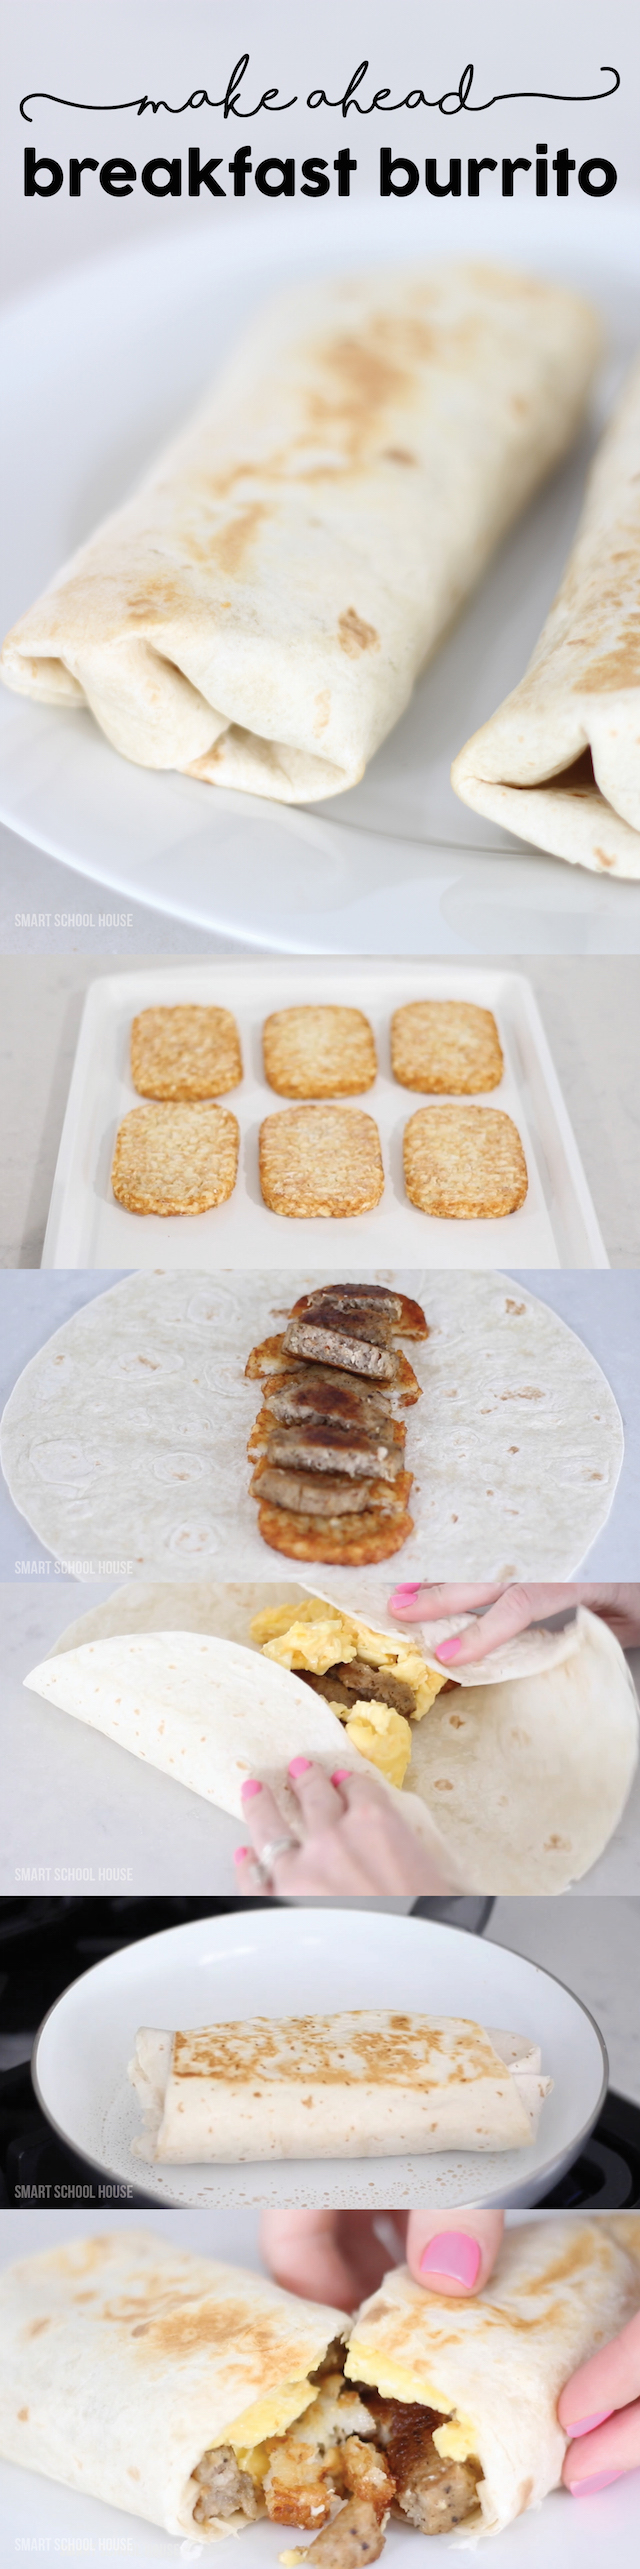 Sausage Hash Brown Breakfast Burrito - uses all the same ingredients as drive through restaurants but costs way less and saves time! Make them ahead, wrap them in foil, and heat them up on busy mornings! 